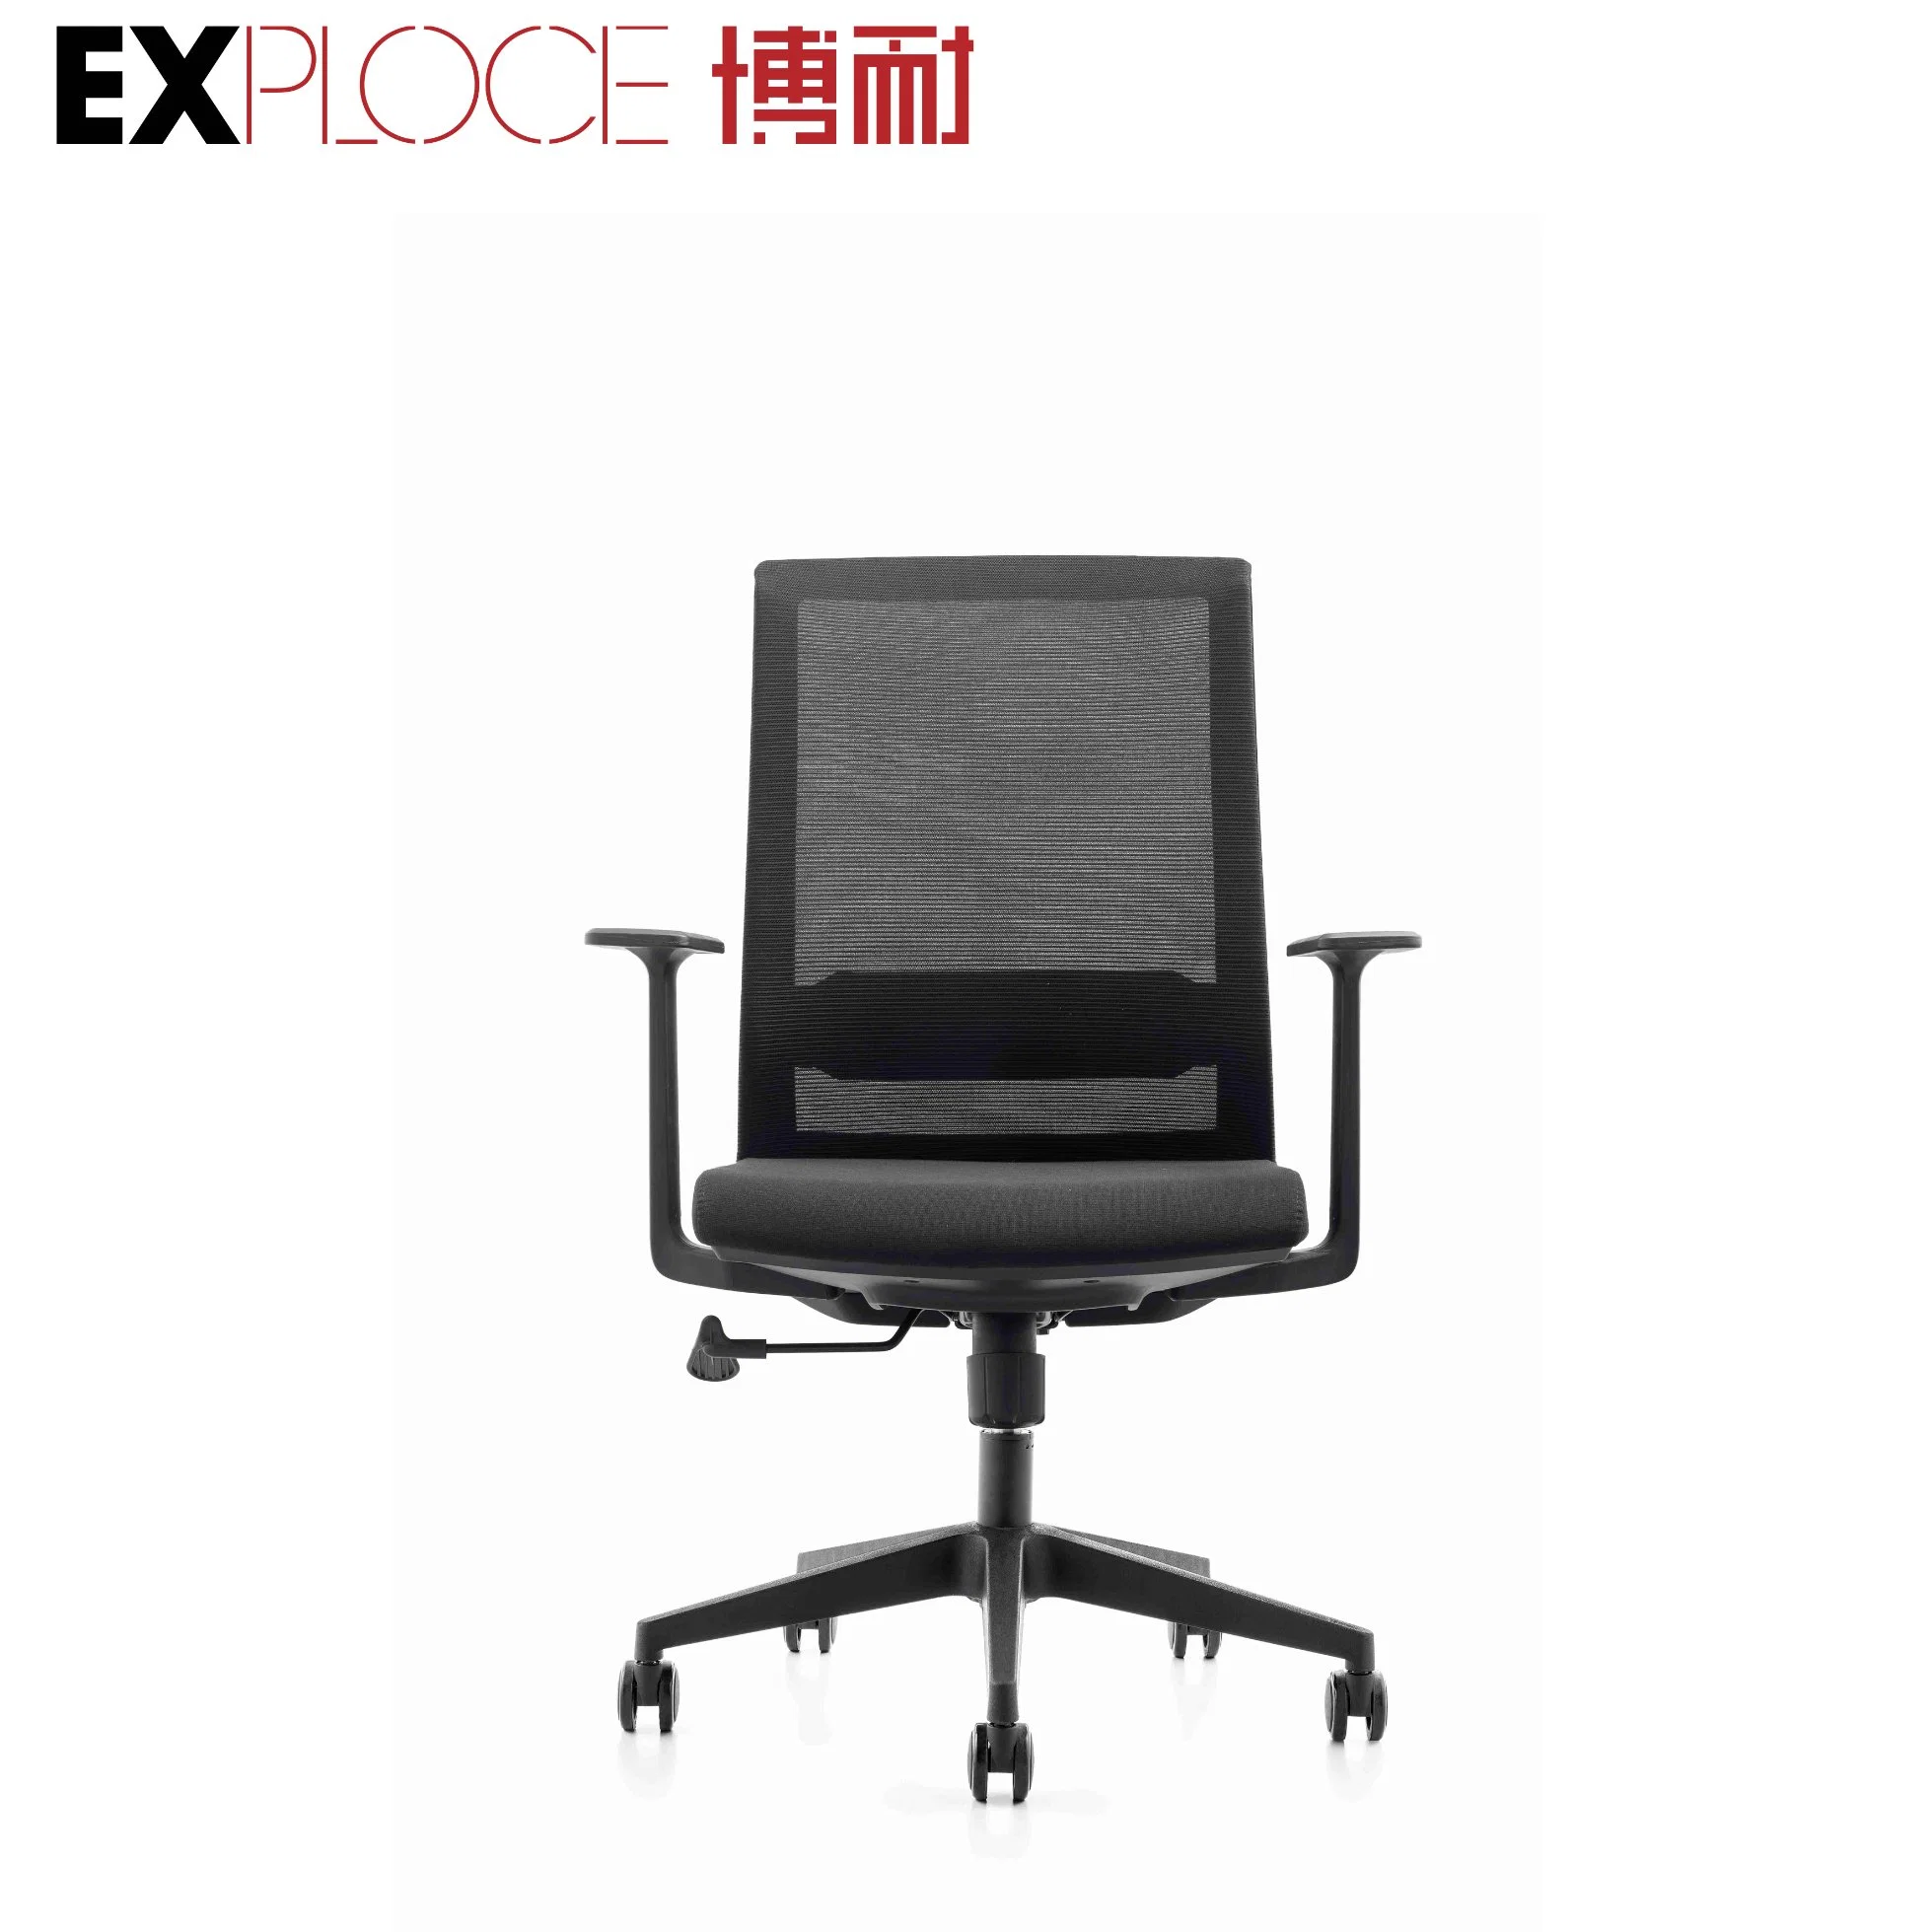 Wholesale Price Furniture Office Table Chairs Executive Mesh Office Chair Swivel Computer Manager Chair